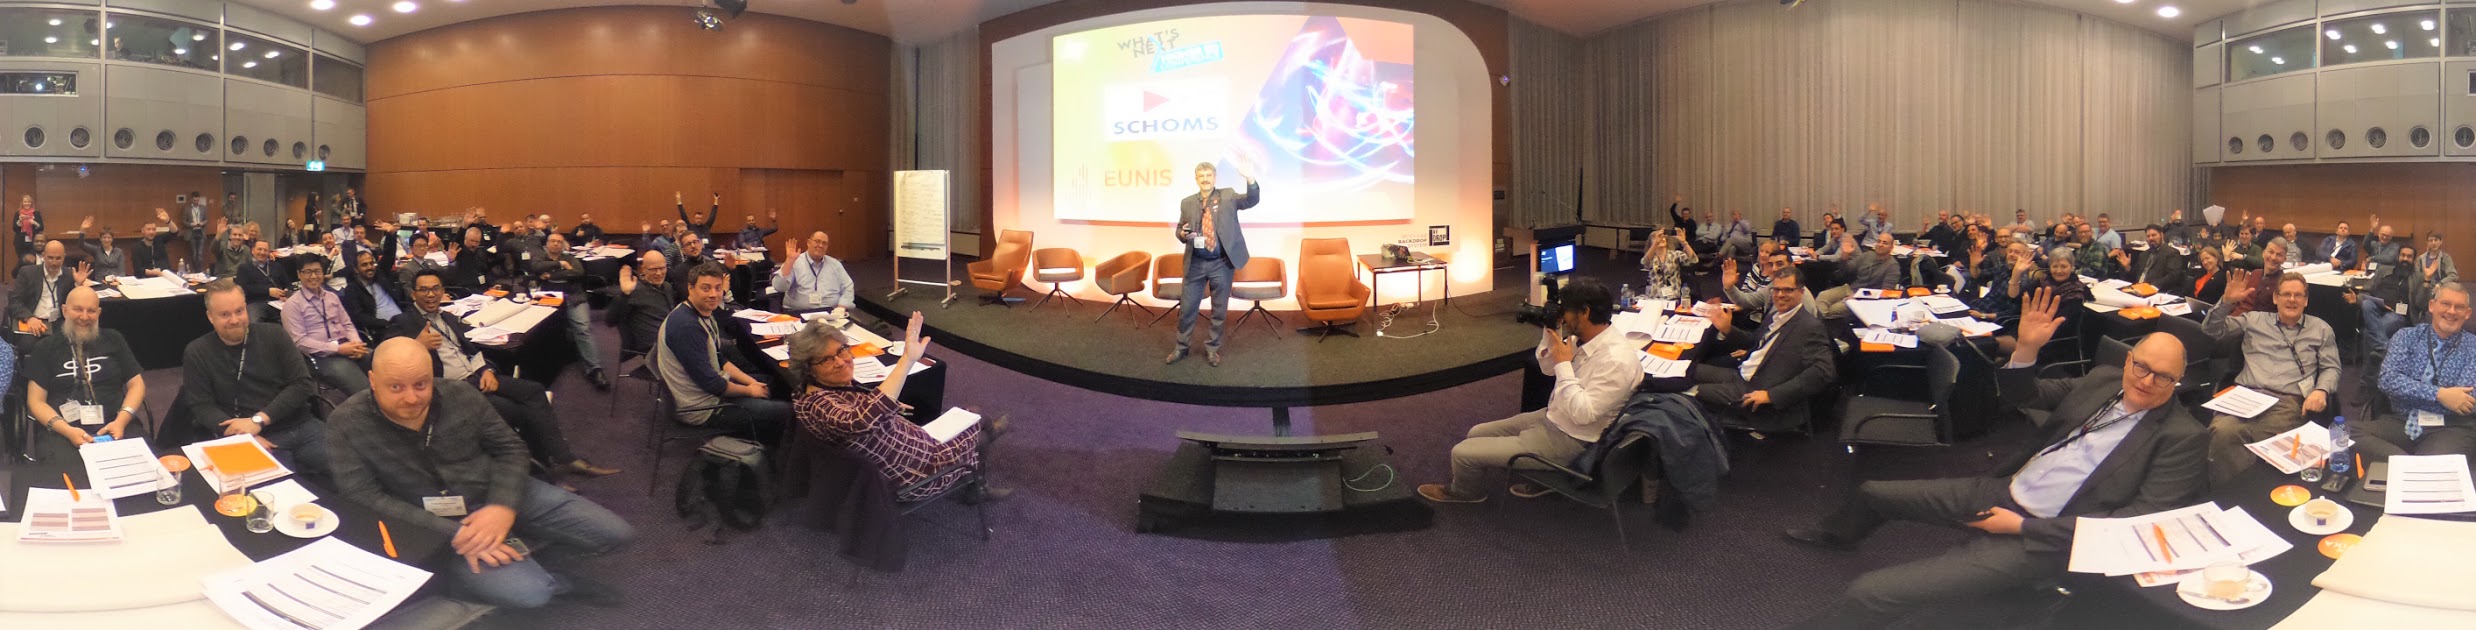 Panorama image of participant of ISE 2019 conference